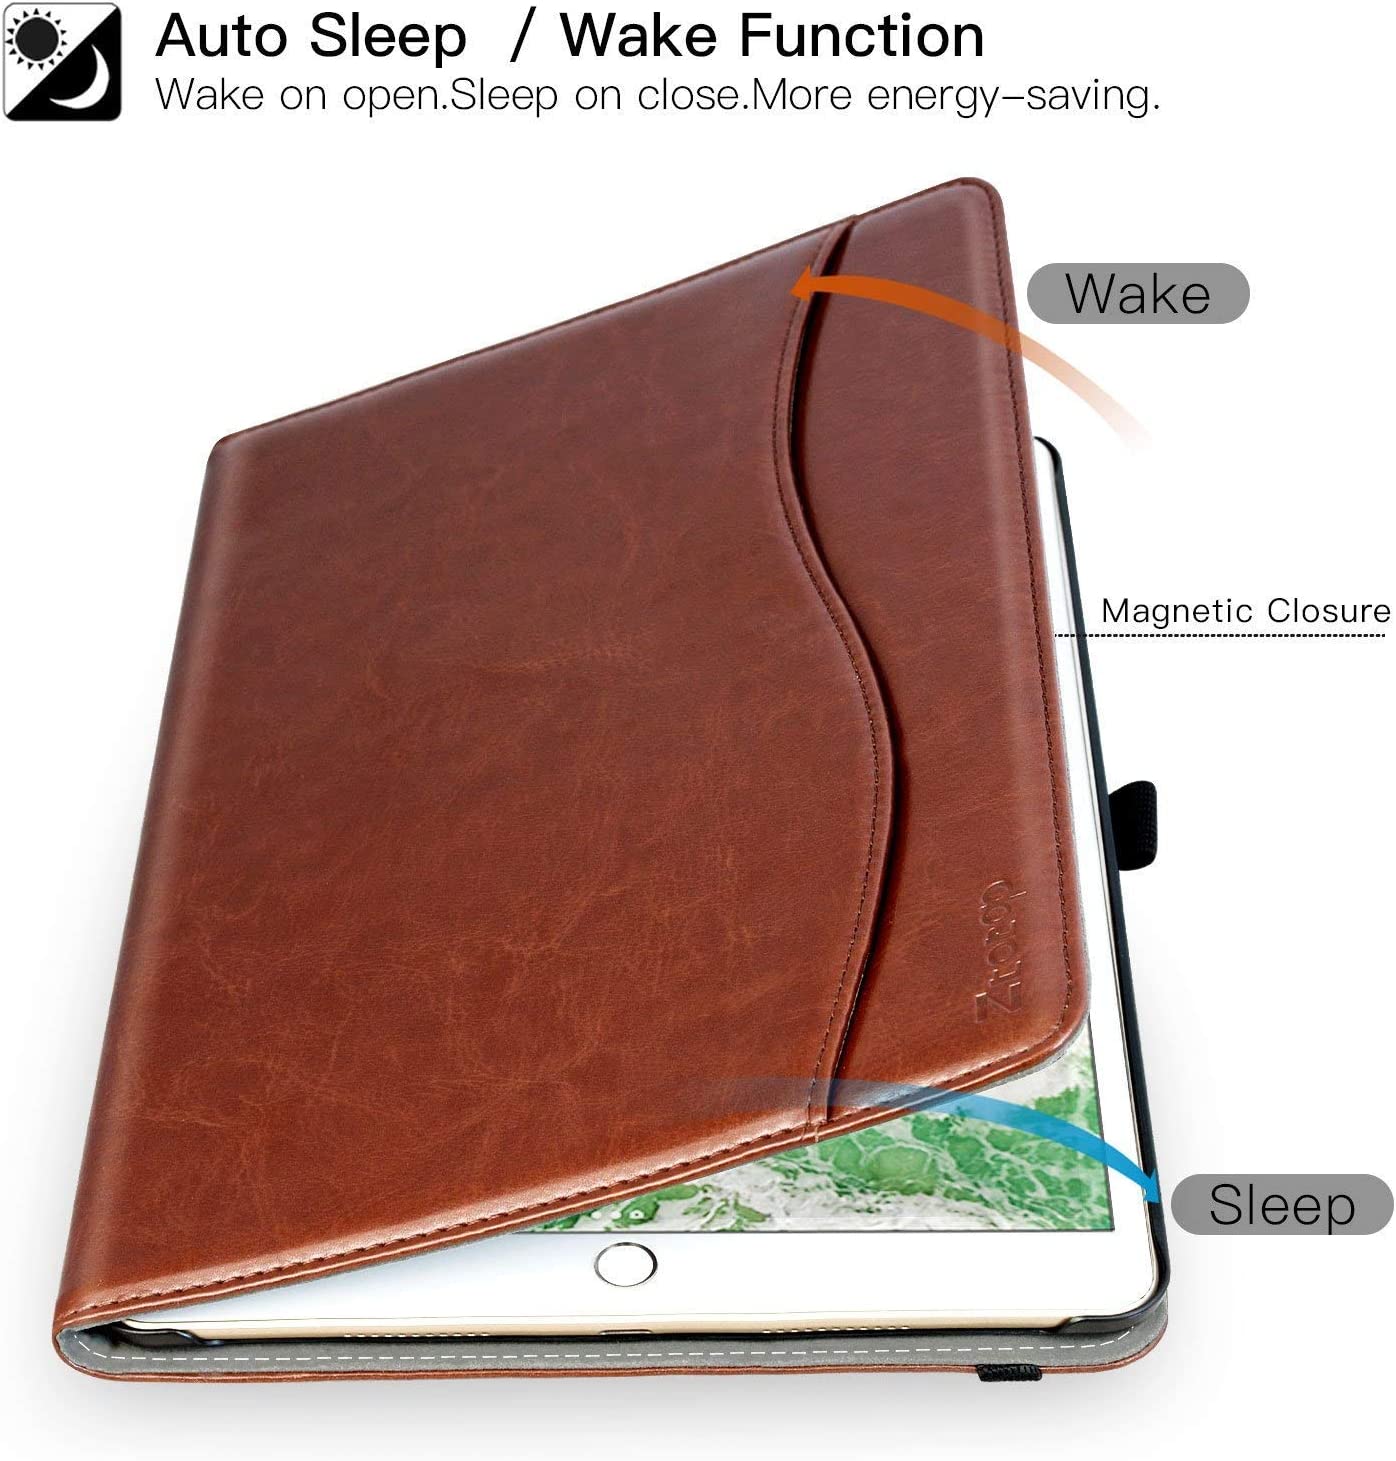 ZtotopCase for iPad Pro 12.9 Inch 2017/2015 (Old Model,1st & 2nd Gen), Premium Leather Business Folding Stand Folio Cover with Auto Wake/Sleep and Document Card Slot, Multiple Viewing Angles